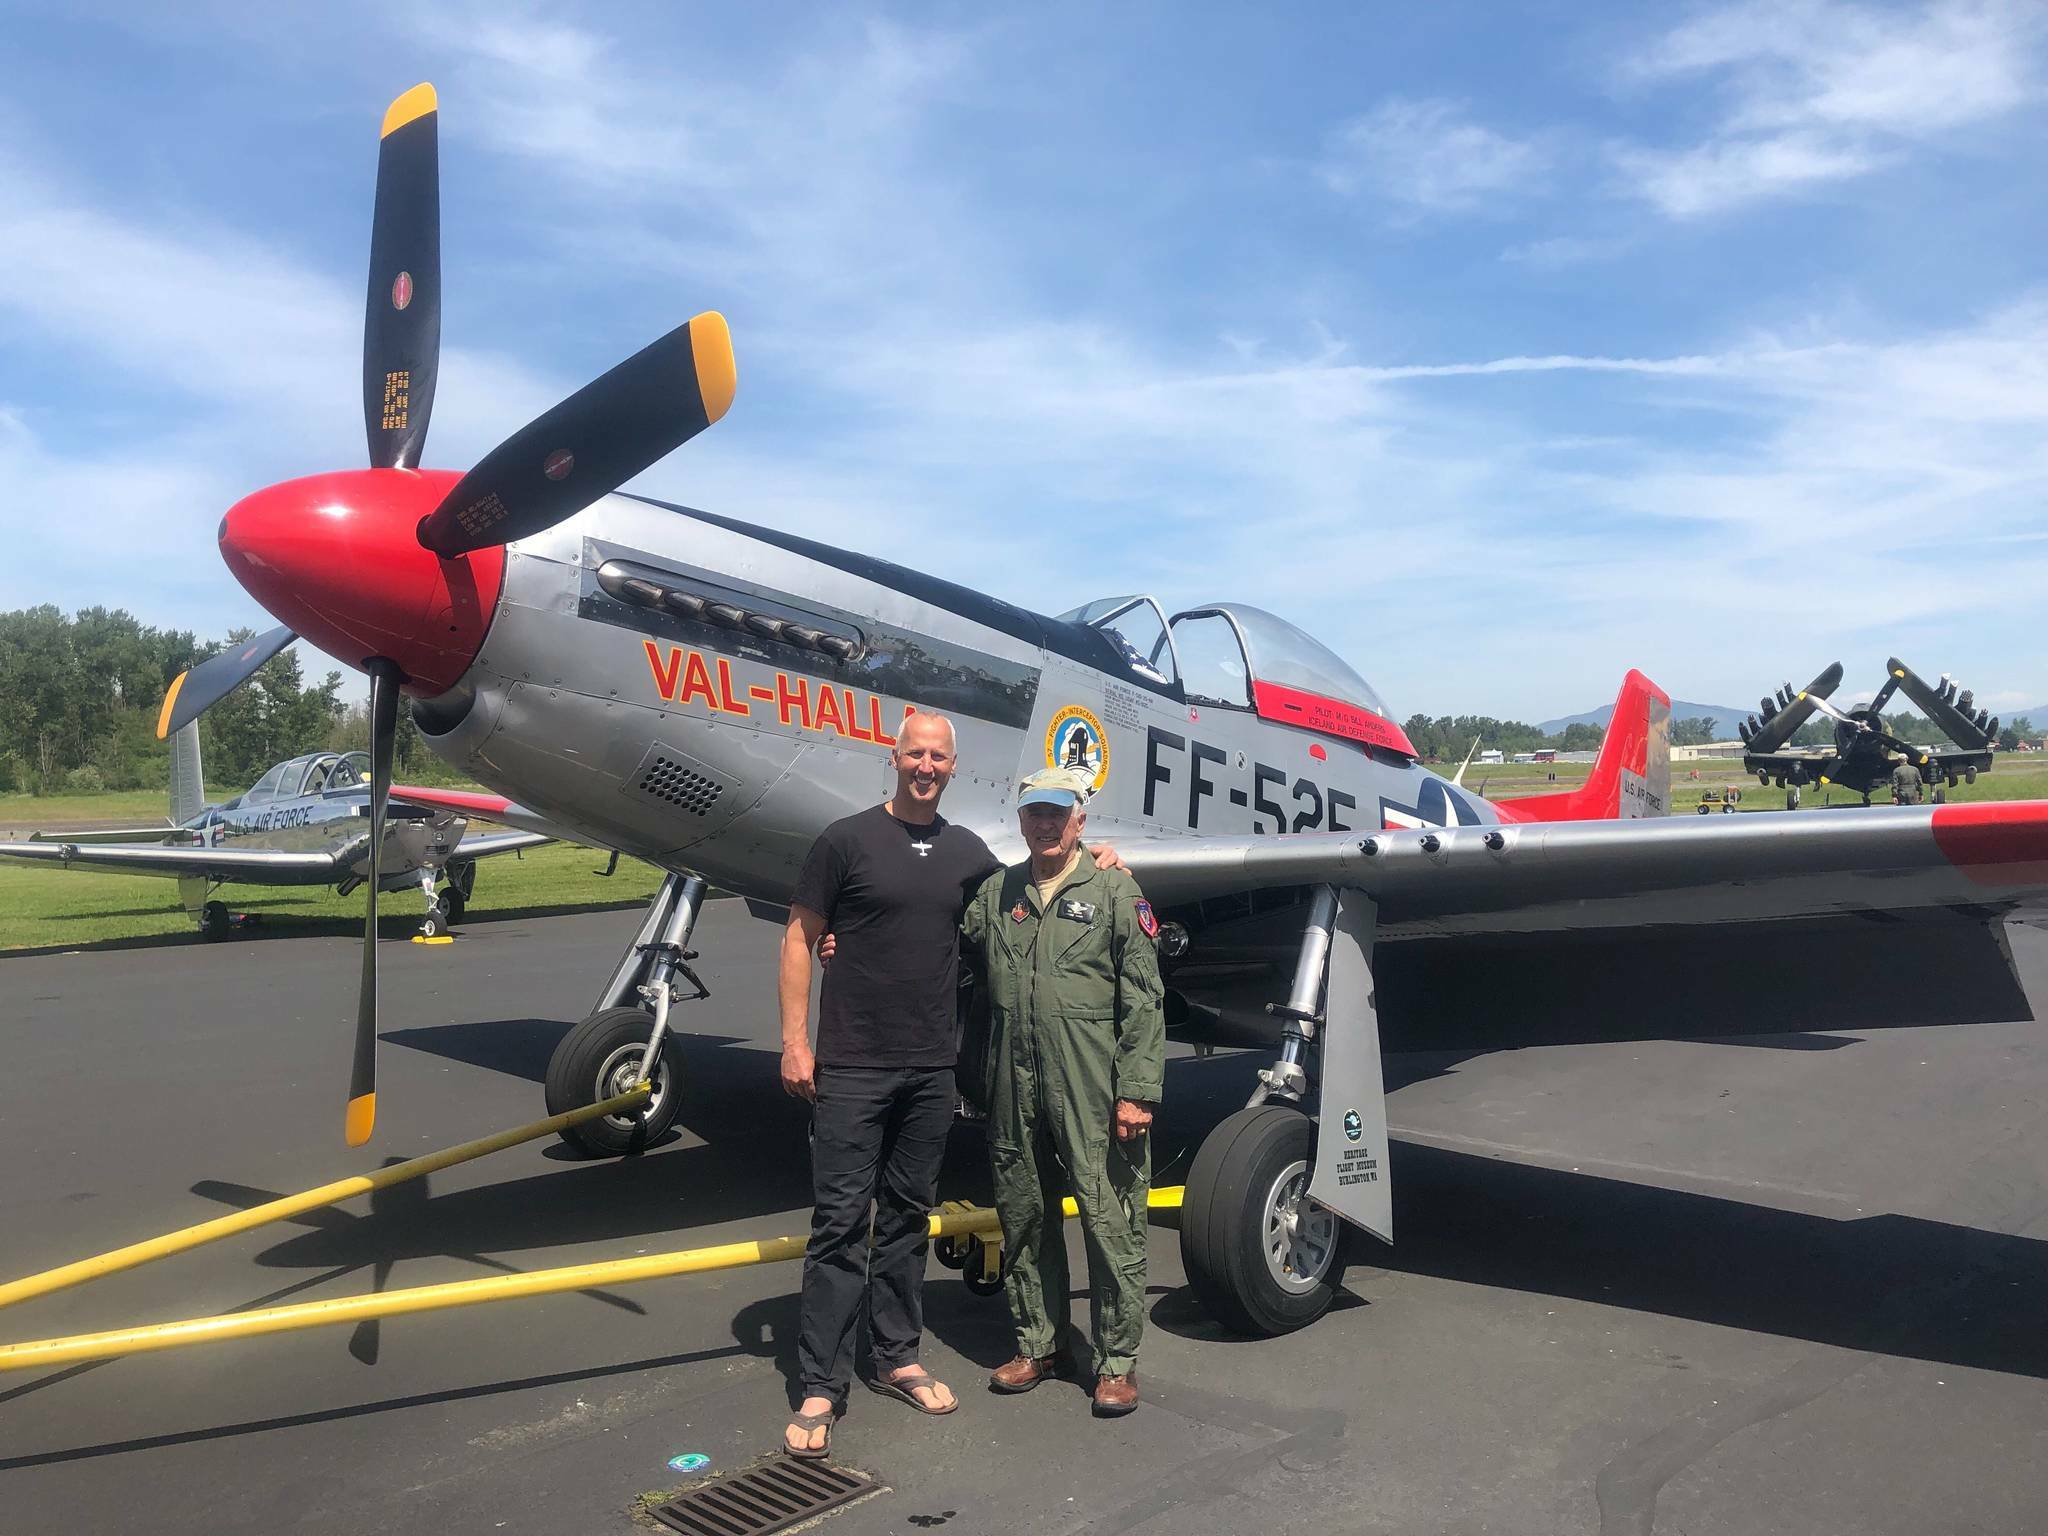 Bill Anders (right) with SeaDoc Society Chief Scientist Joe Gaydos in 2019 after Bill and his wife Valerie surprised the nonprofit with a $50,000 donation to support Salish Sea research. The two are pictured with Bill’s vintage P-51 Mustang aircraft.